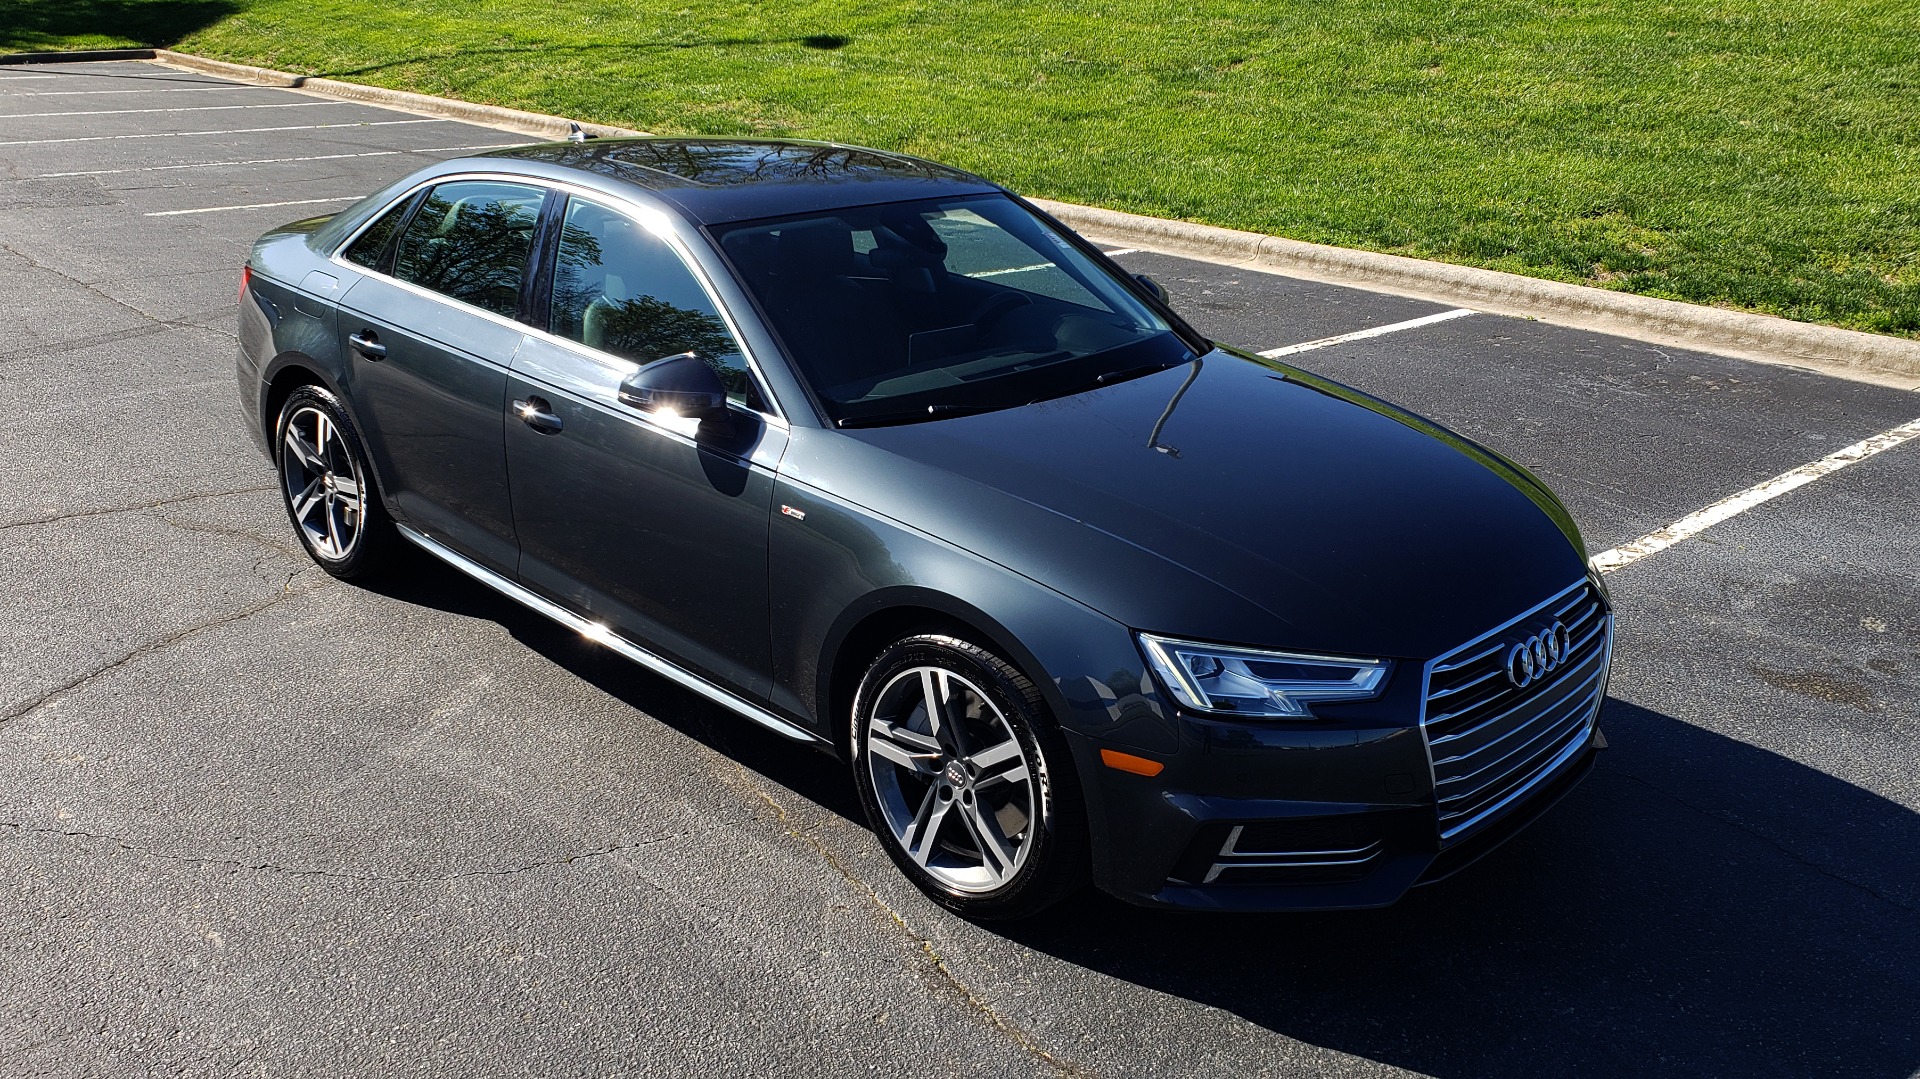 Used 2017 Audi A4 PREMIUM PLUS 2.0T S-TRONIC / NAV / SUNROOF / REARVIEW for sale Sold at Formula Imports in Charlotte NC 28227 9